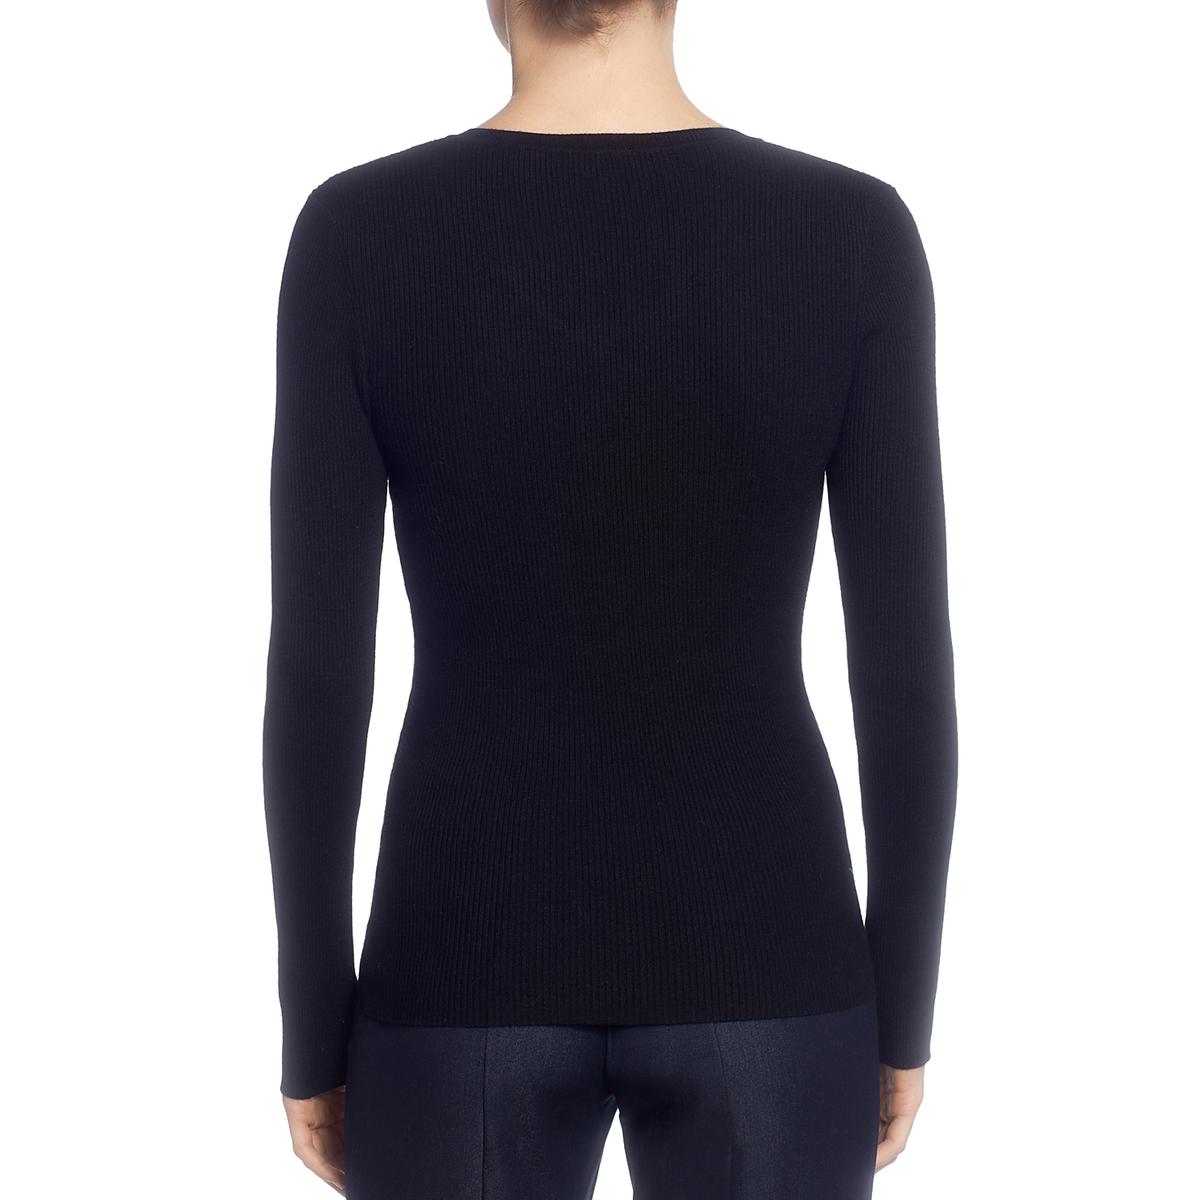 T Tahari Womens Black Lace-Up Ribbed Casual Pullover Sweater Top L BHFO ...